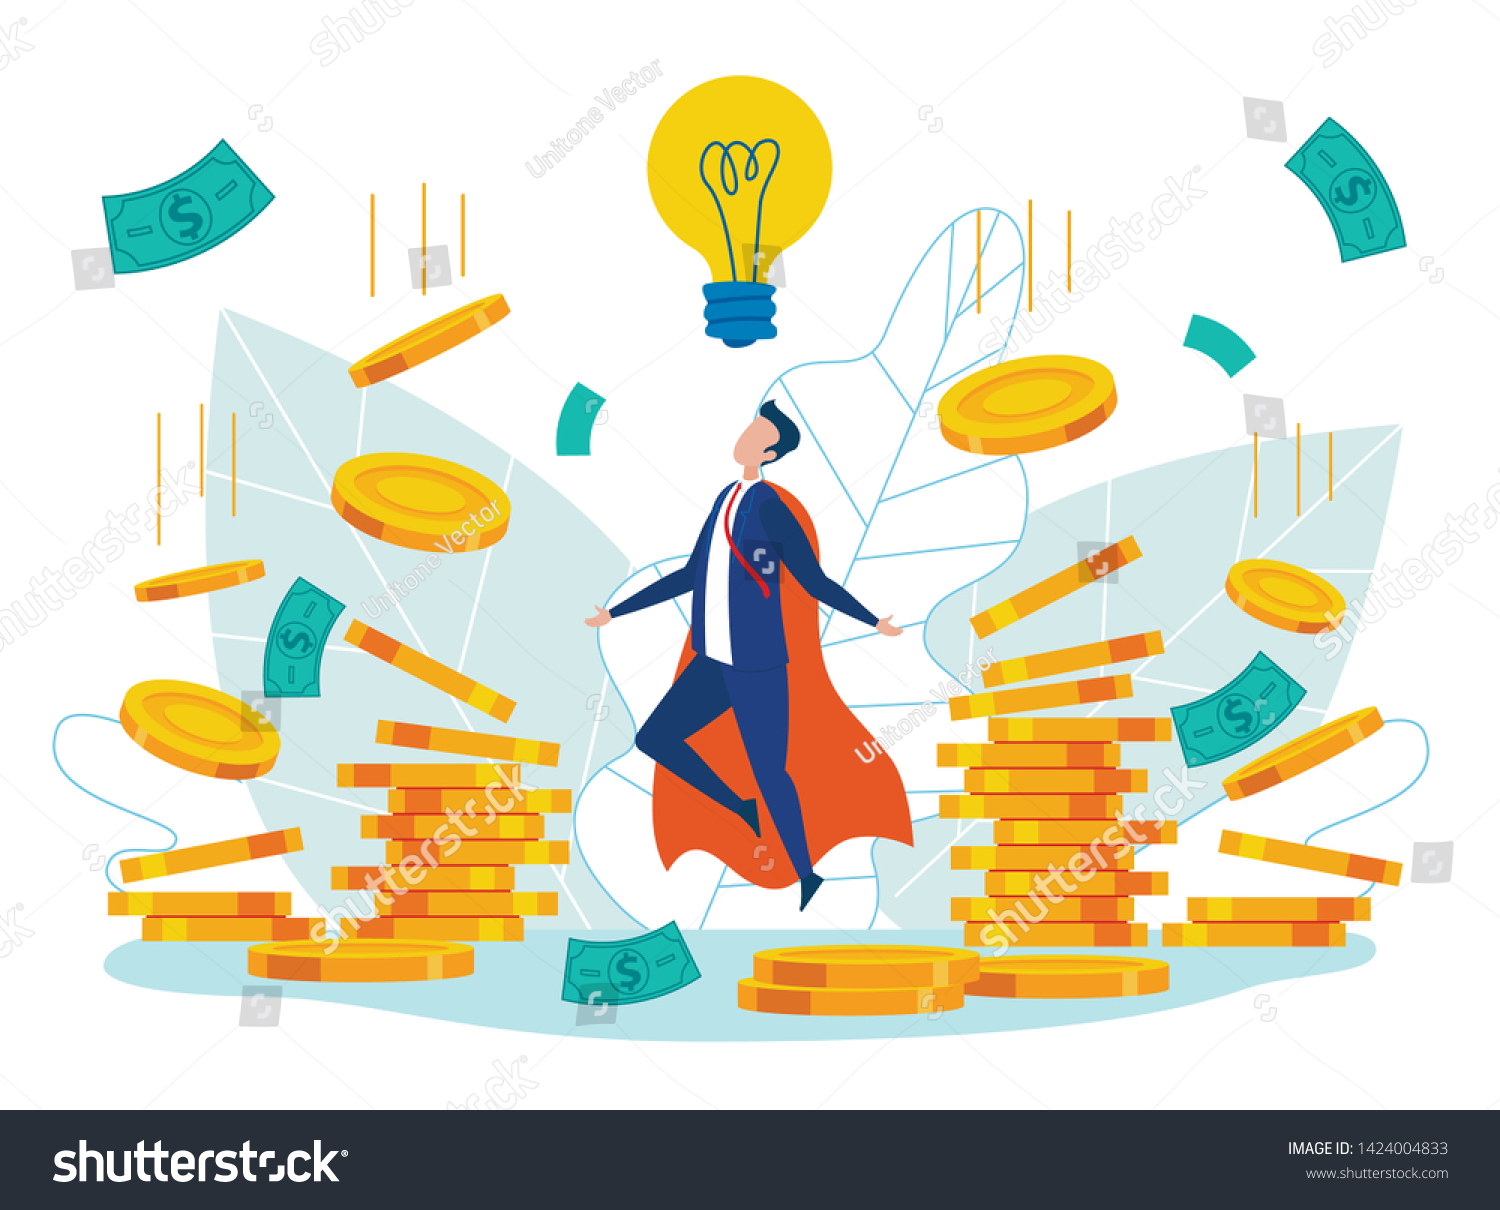 SVG of Idea Generation Cartoon Flat Vector Illustration. Businessman in Hero Costume Creating Business Ideas. Earning Money and Getting Profit. Reward for New Idea. Character Making Money. Work on Project. svg